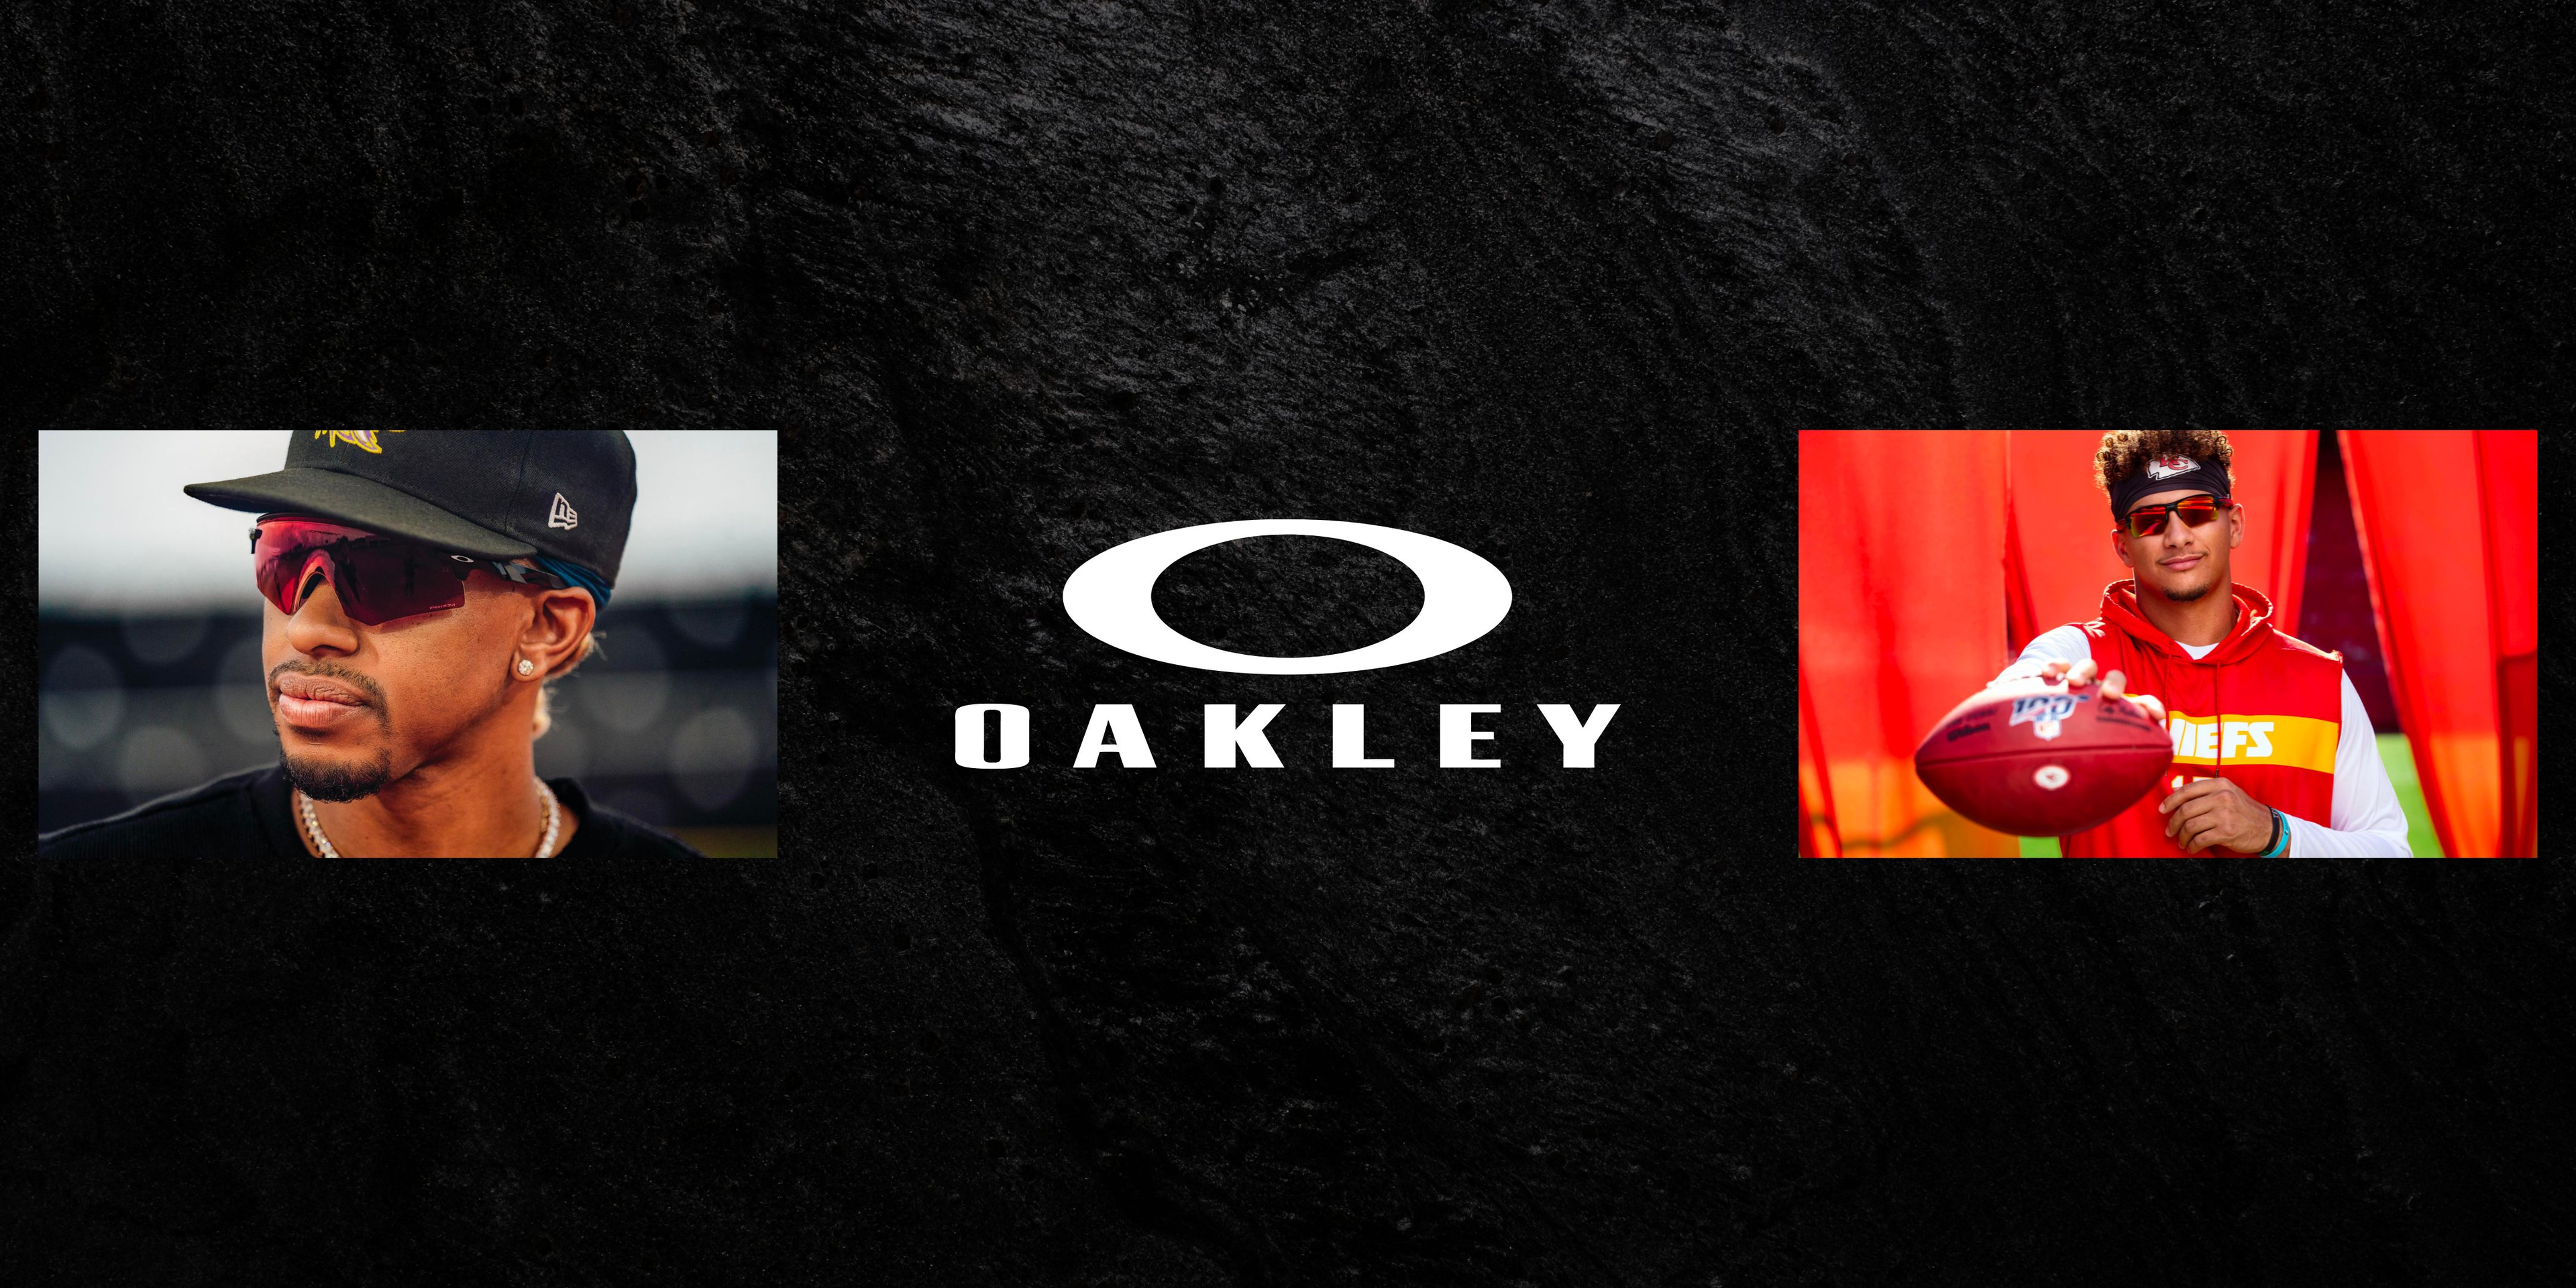 Explore the Oakley Sunglasses Collection - Unrivaled style and performance for active lifestyles. Cutting-edge designs, advanced lens technology, and sport-specific options. Elevate your vision with Oakley, available exclusively at TCA.